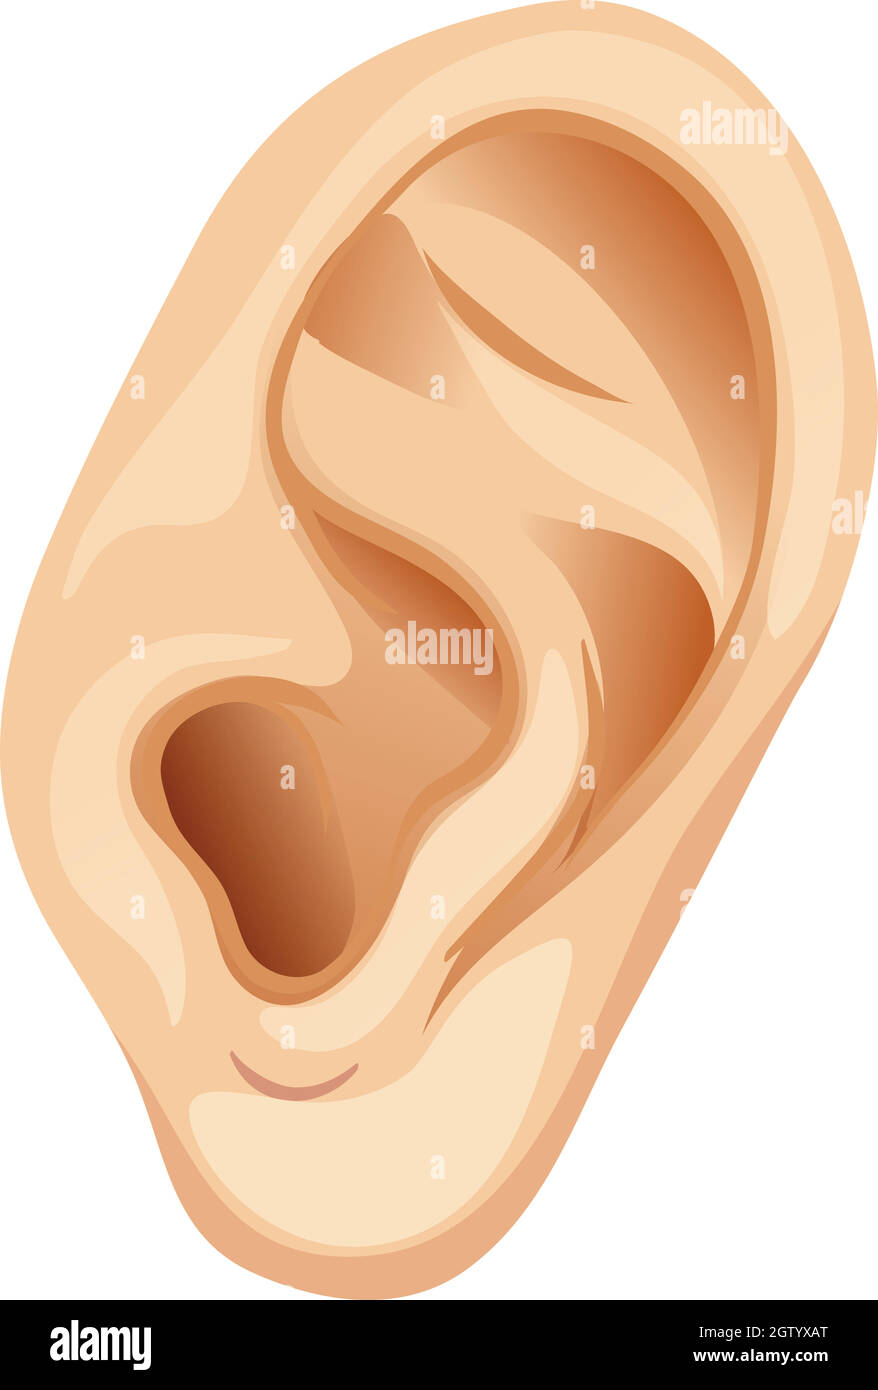 A Human Ear on White Background Stock Vector